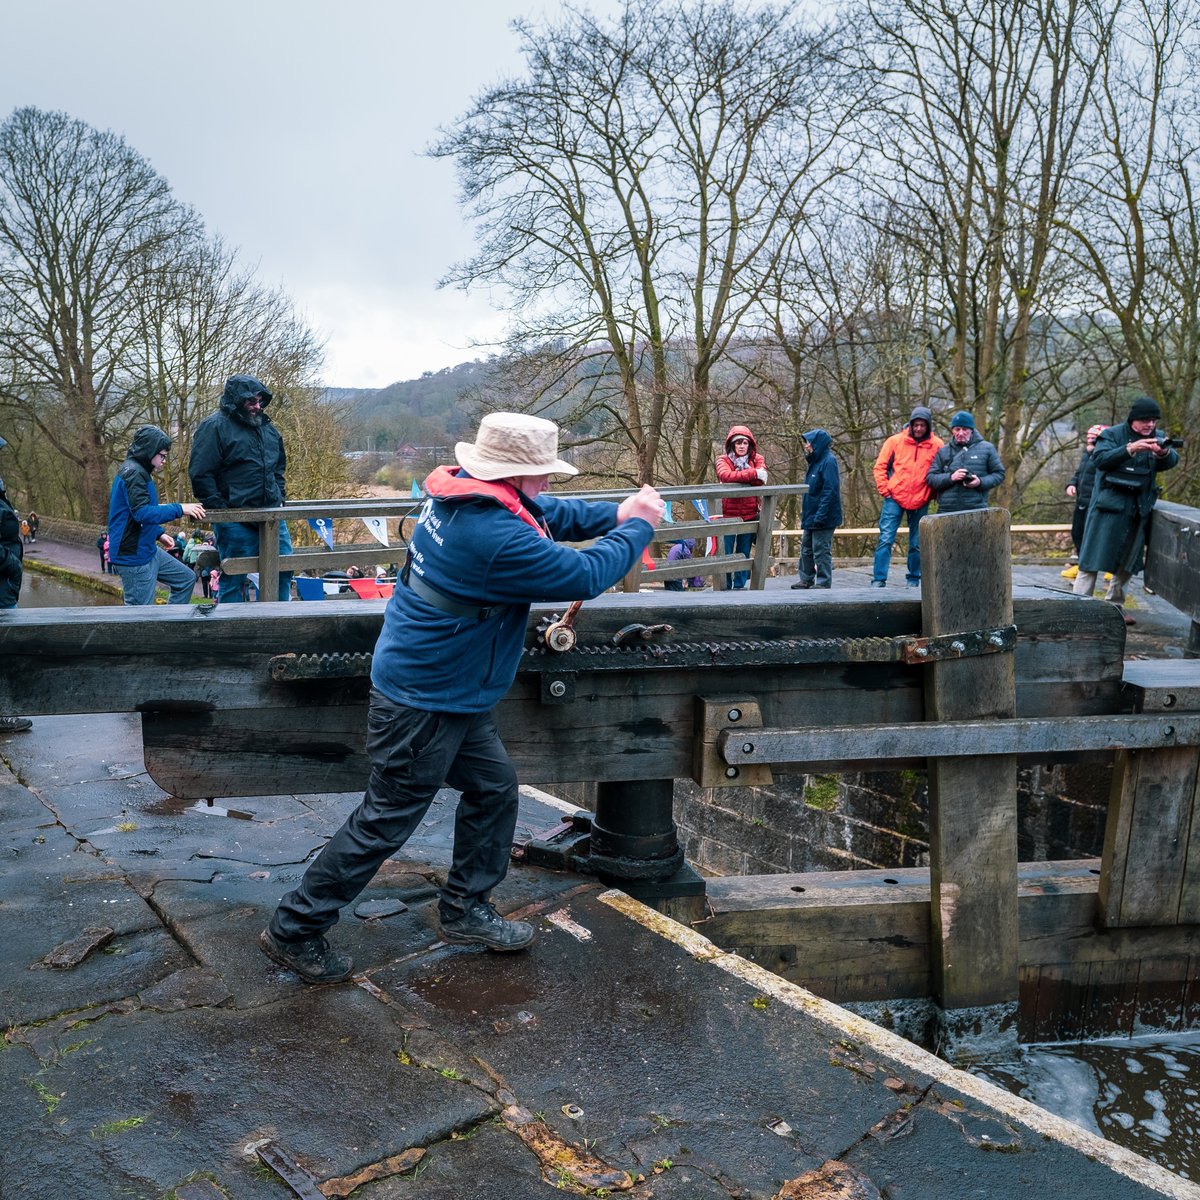 We would like to send thanks to all who sent us photos from the 250th Celebration of Bingley Five Rise Locks. These are just a few of the photos we received and they clearly show how much of a wonderful day it was for all 😄 #Bingley @CanalRiverTrust @bradfordmdc #Bradford